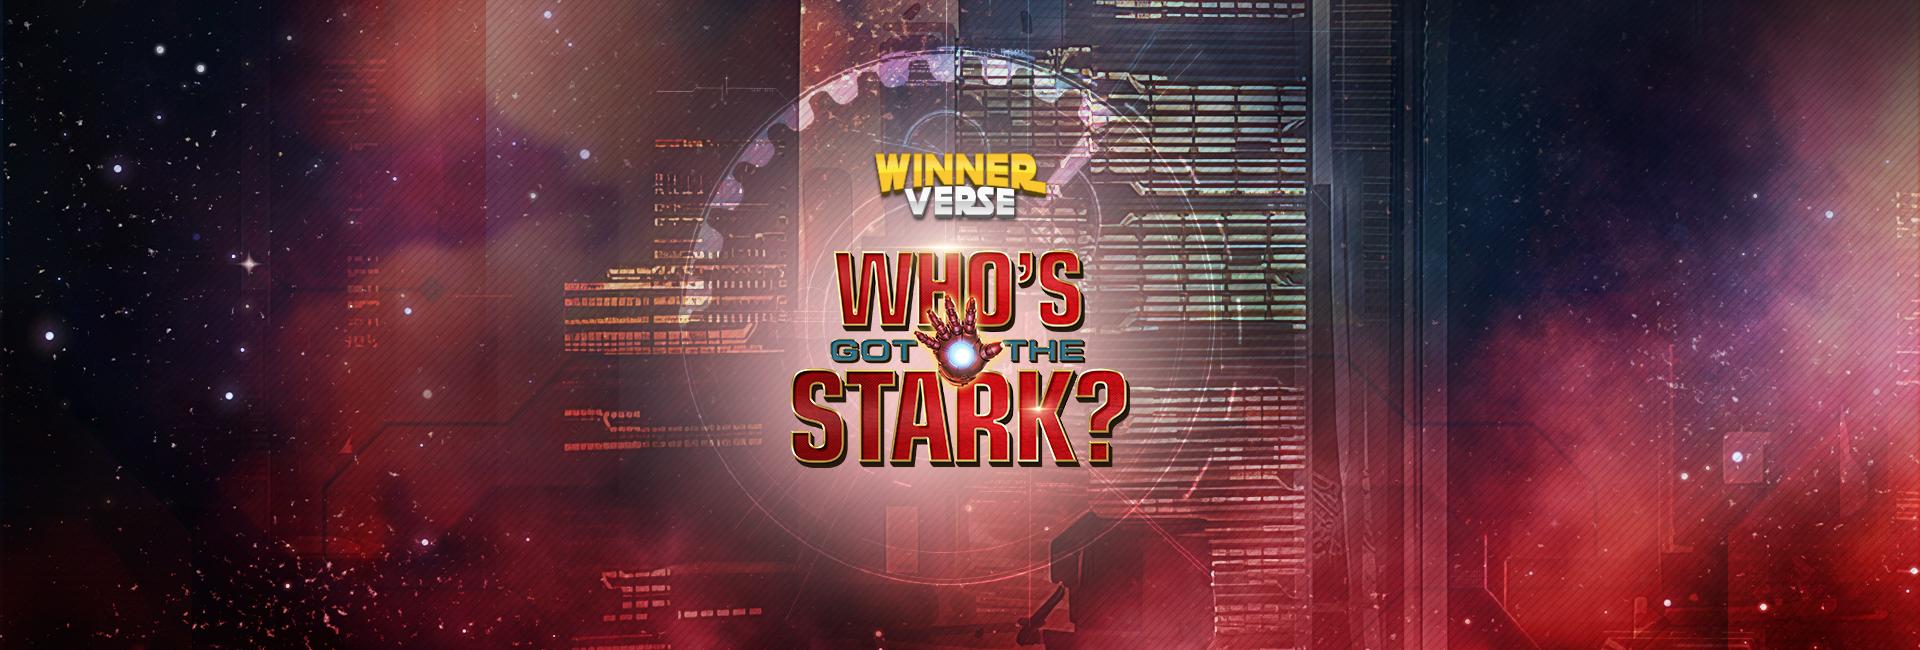 Who got the Stark? Islington College Event banner